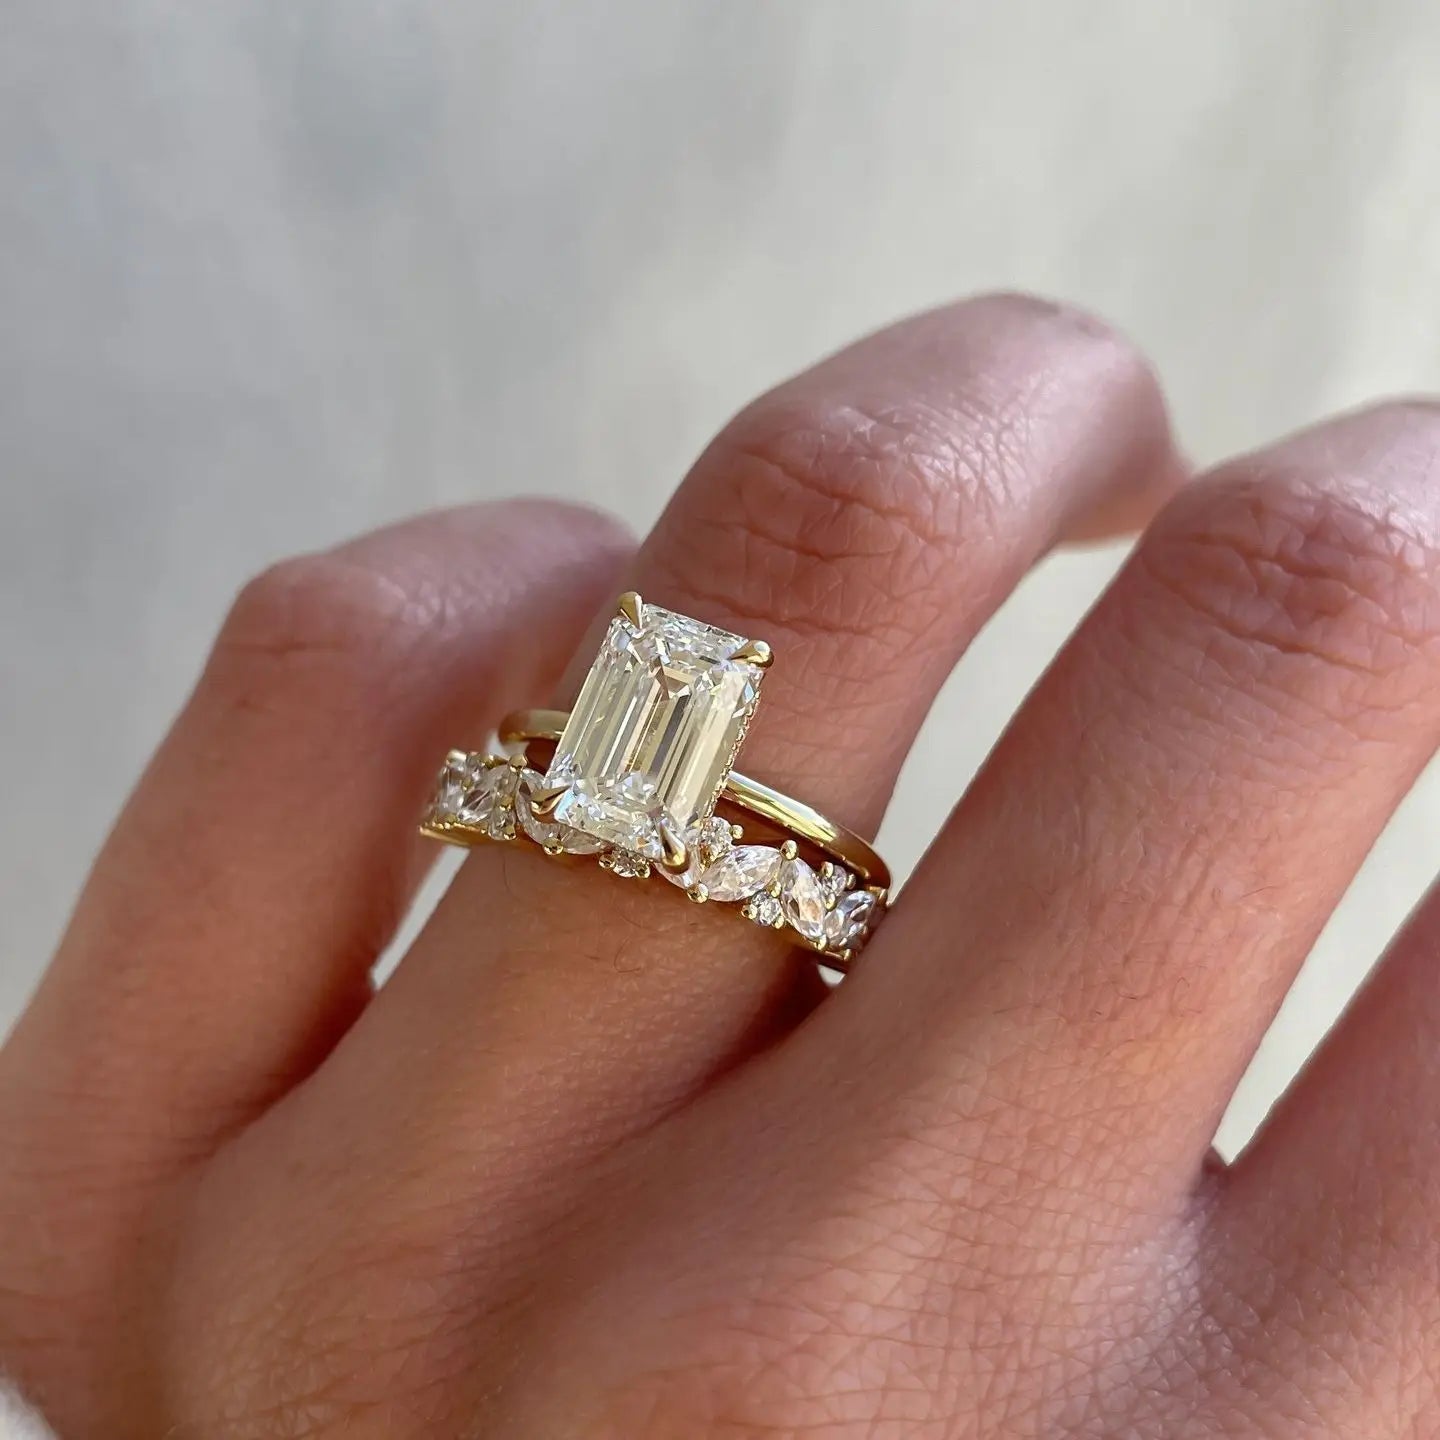 Bridal Set - Emerald Cut 3 Carat Moissanite Ring with Pave Eternity Band